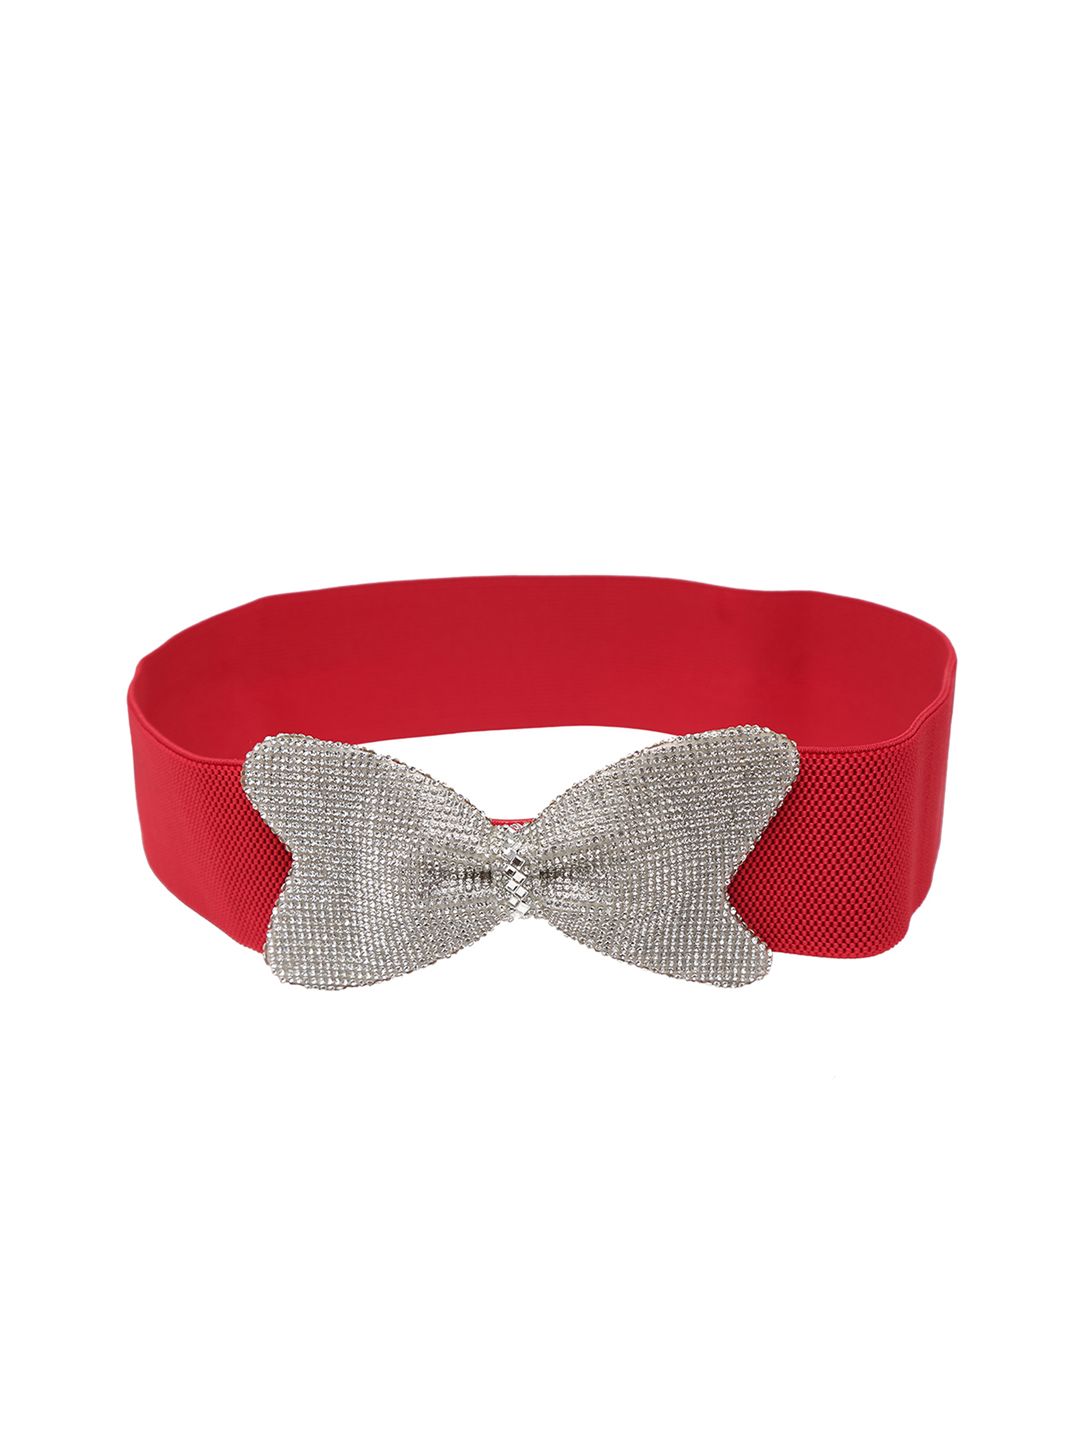 Mali Fionna Women Red Solid Cinched Waist Belt Price in India